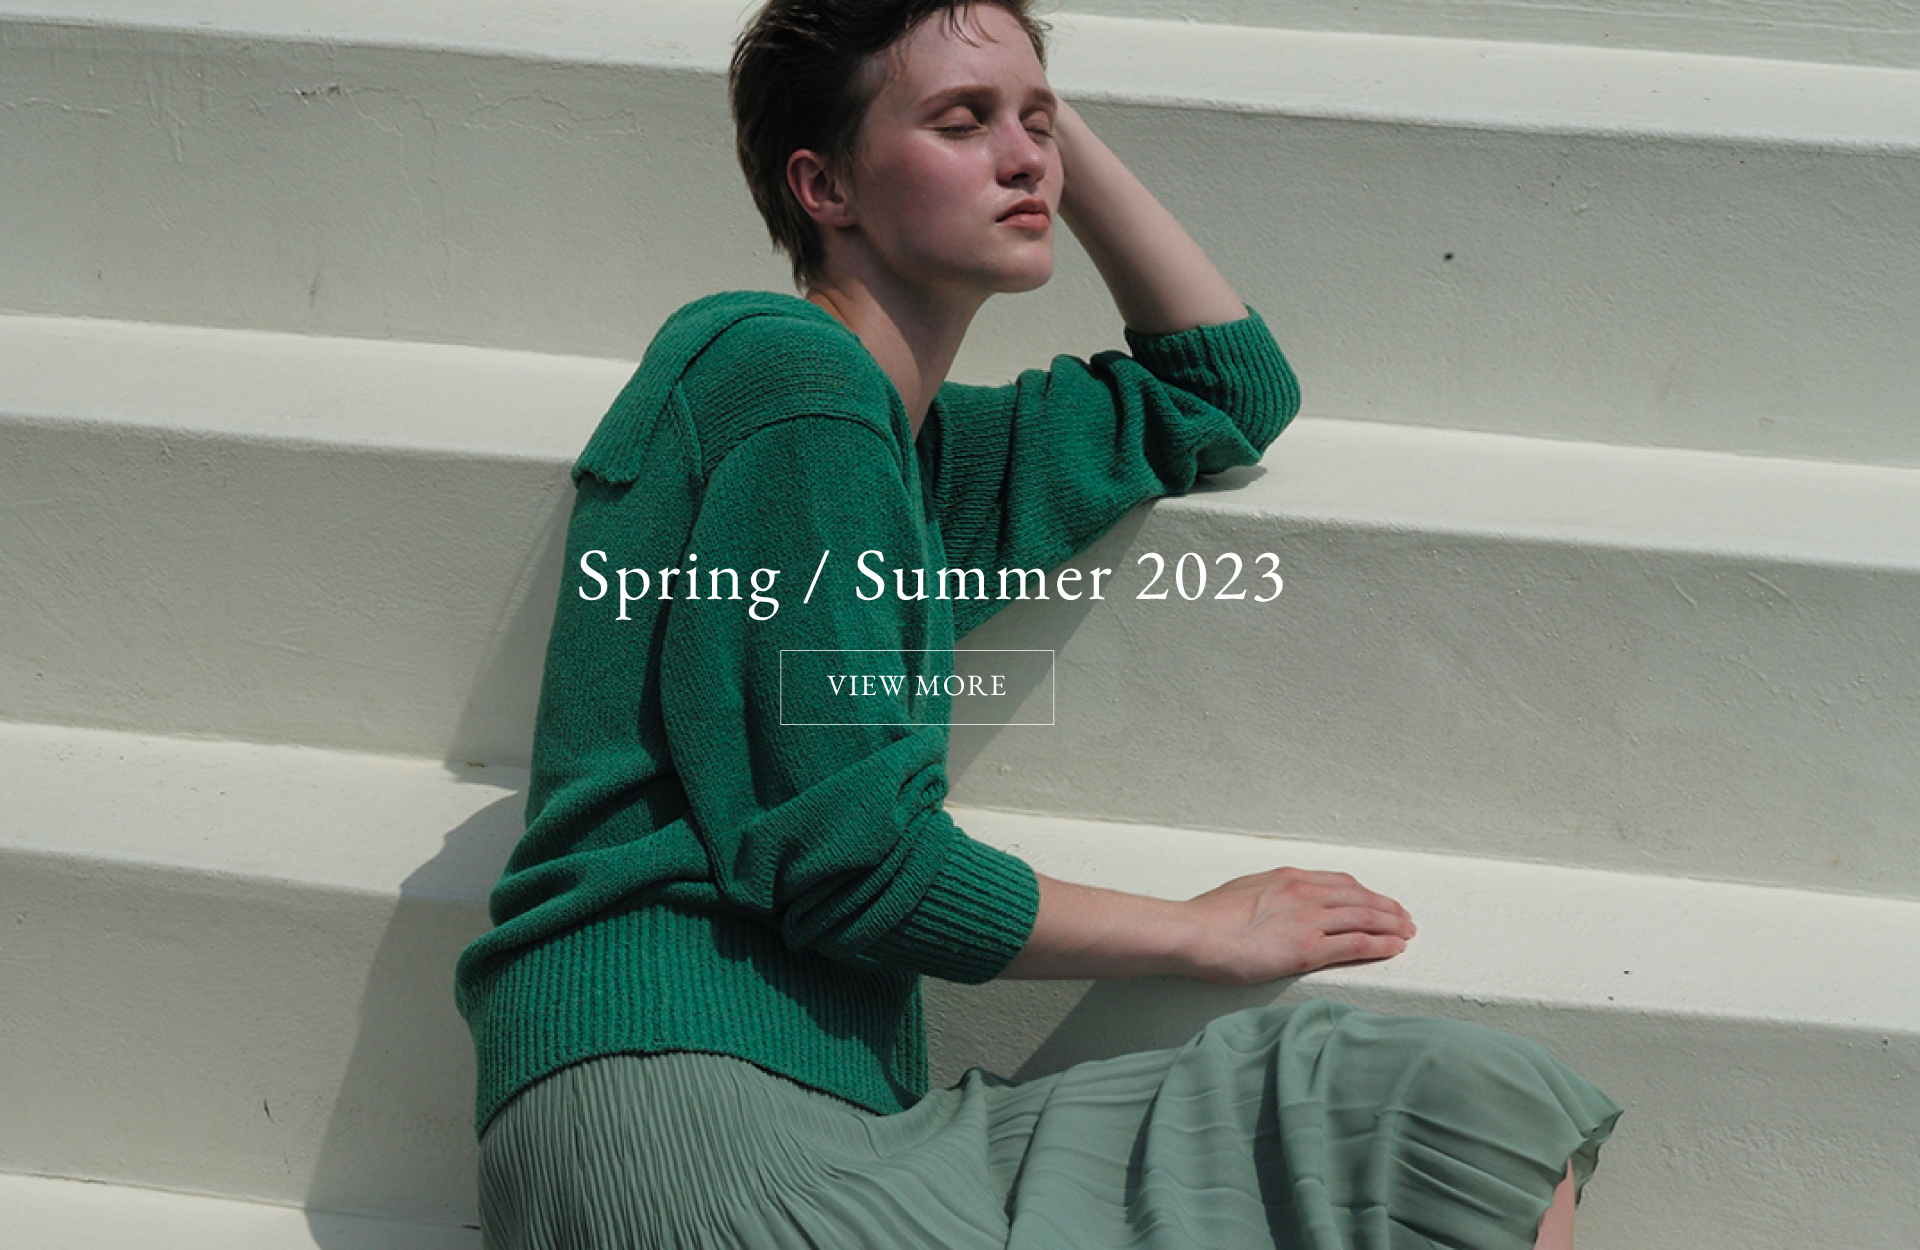 2023 Spring & Summer Collection